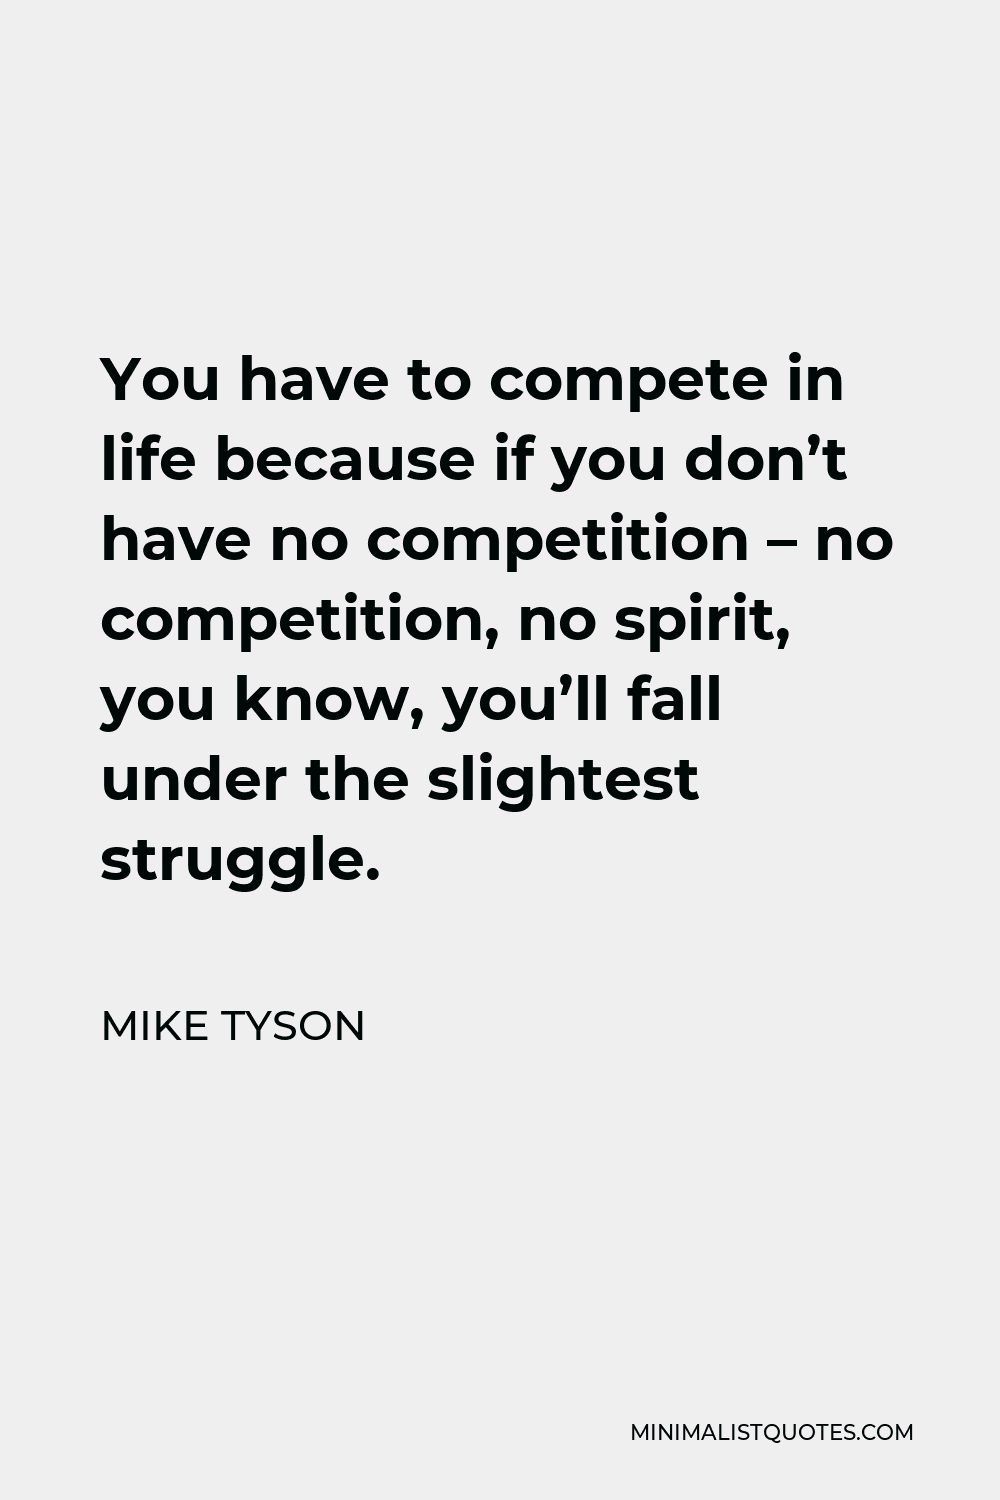 Mike Tyson Quote - You have to compete in life because if you don’t have no competition – no competition, no spirit, you know, you’ll fall under the slightest struggle.